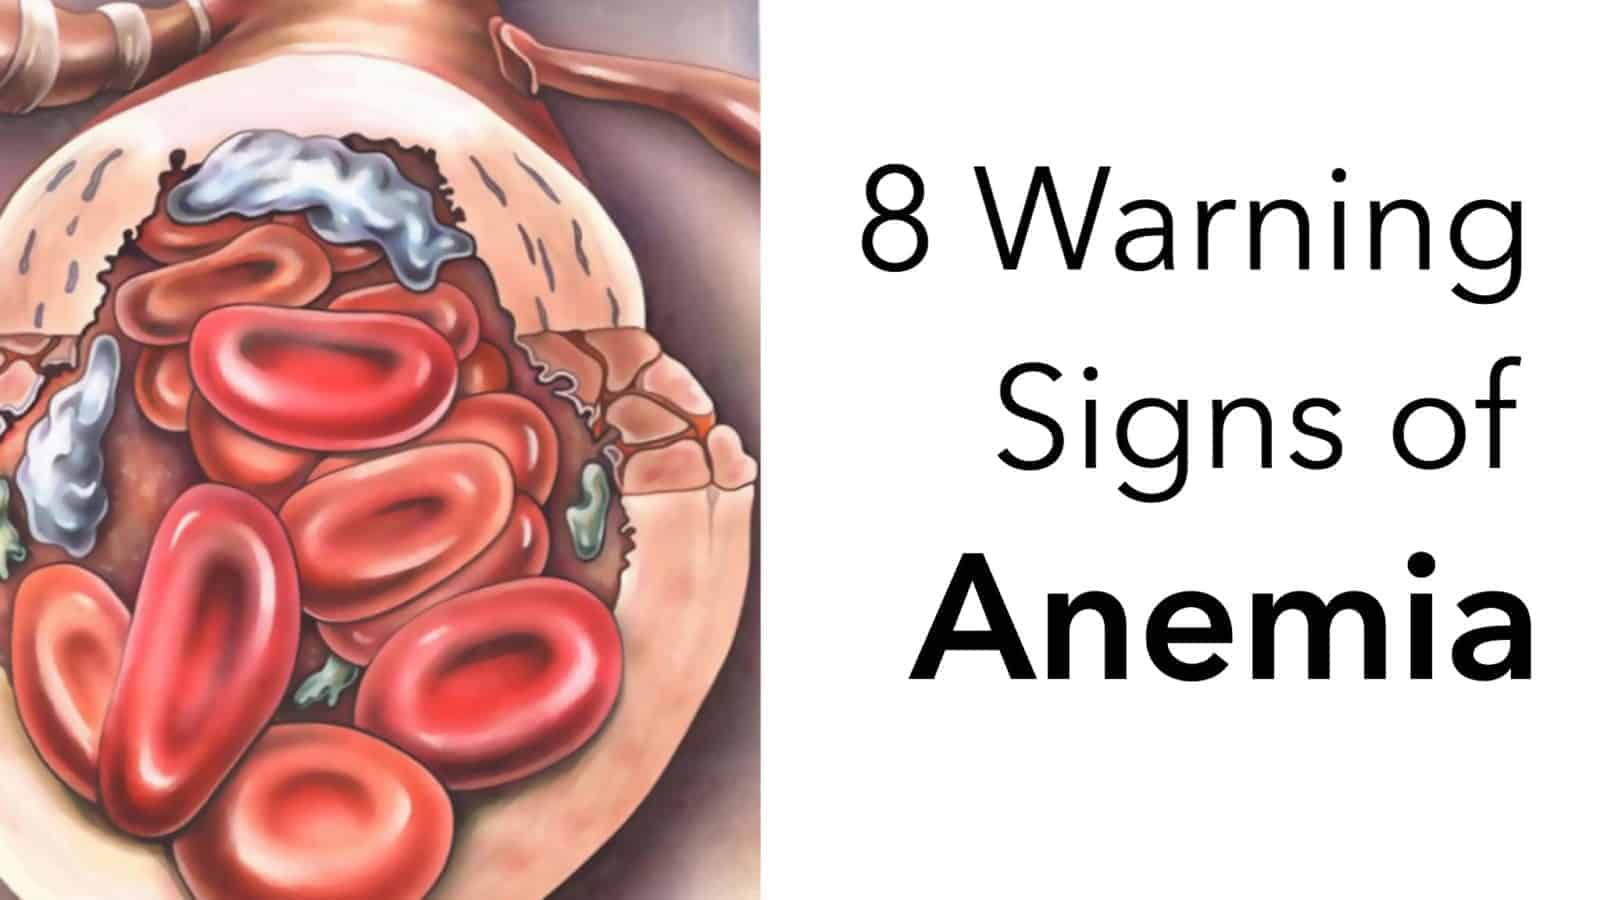 8 Warning Signs of Anemia